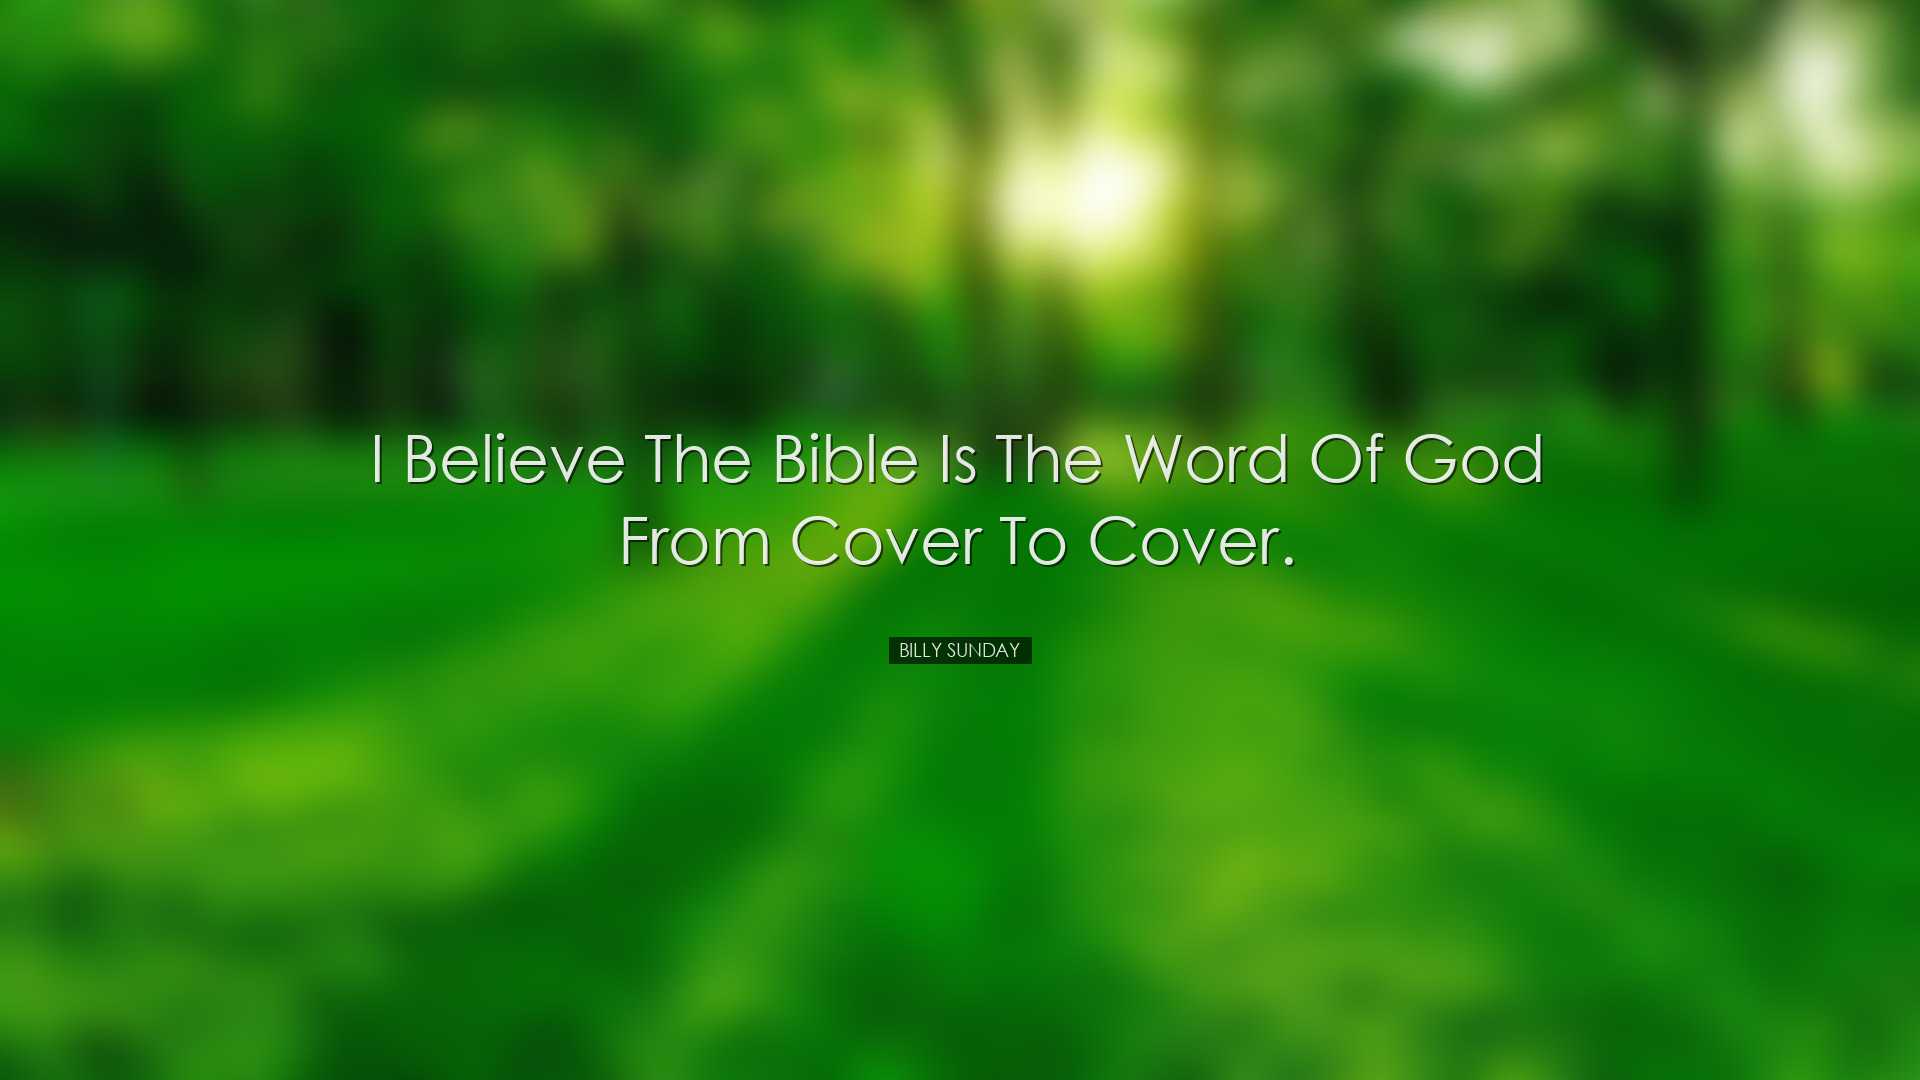 I believe the Bible is the word of God from cover to cover. - Bill